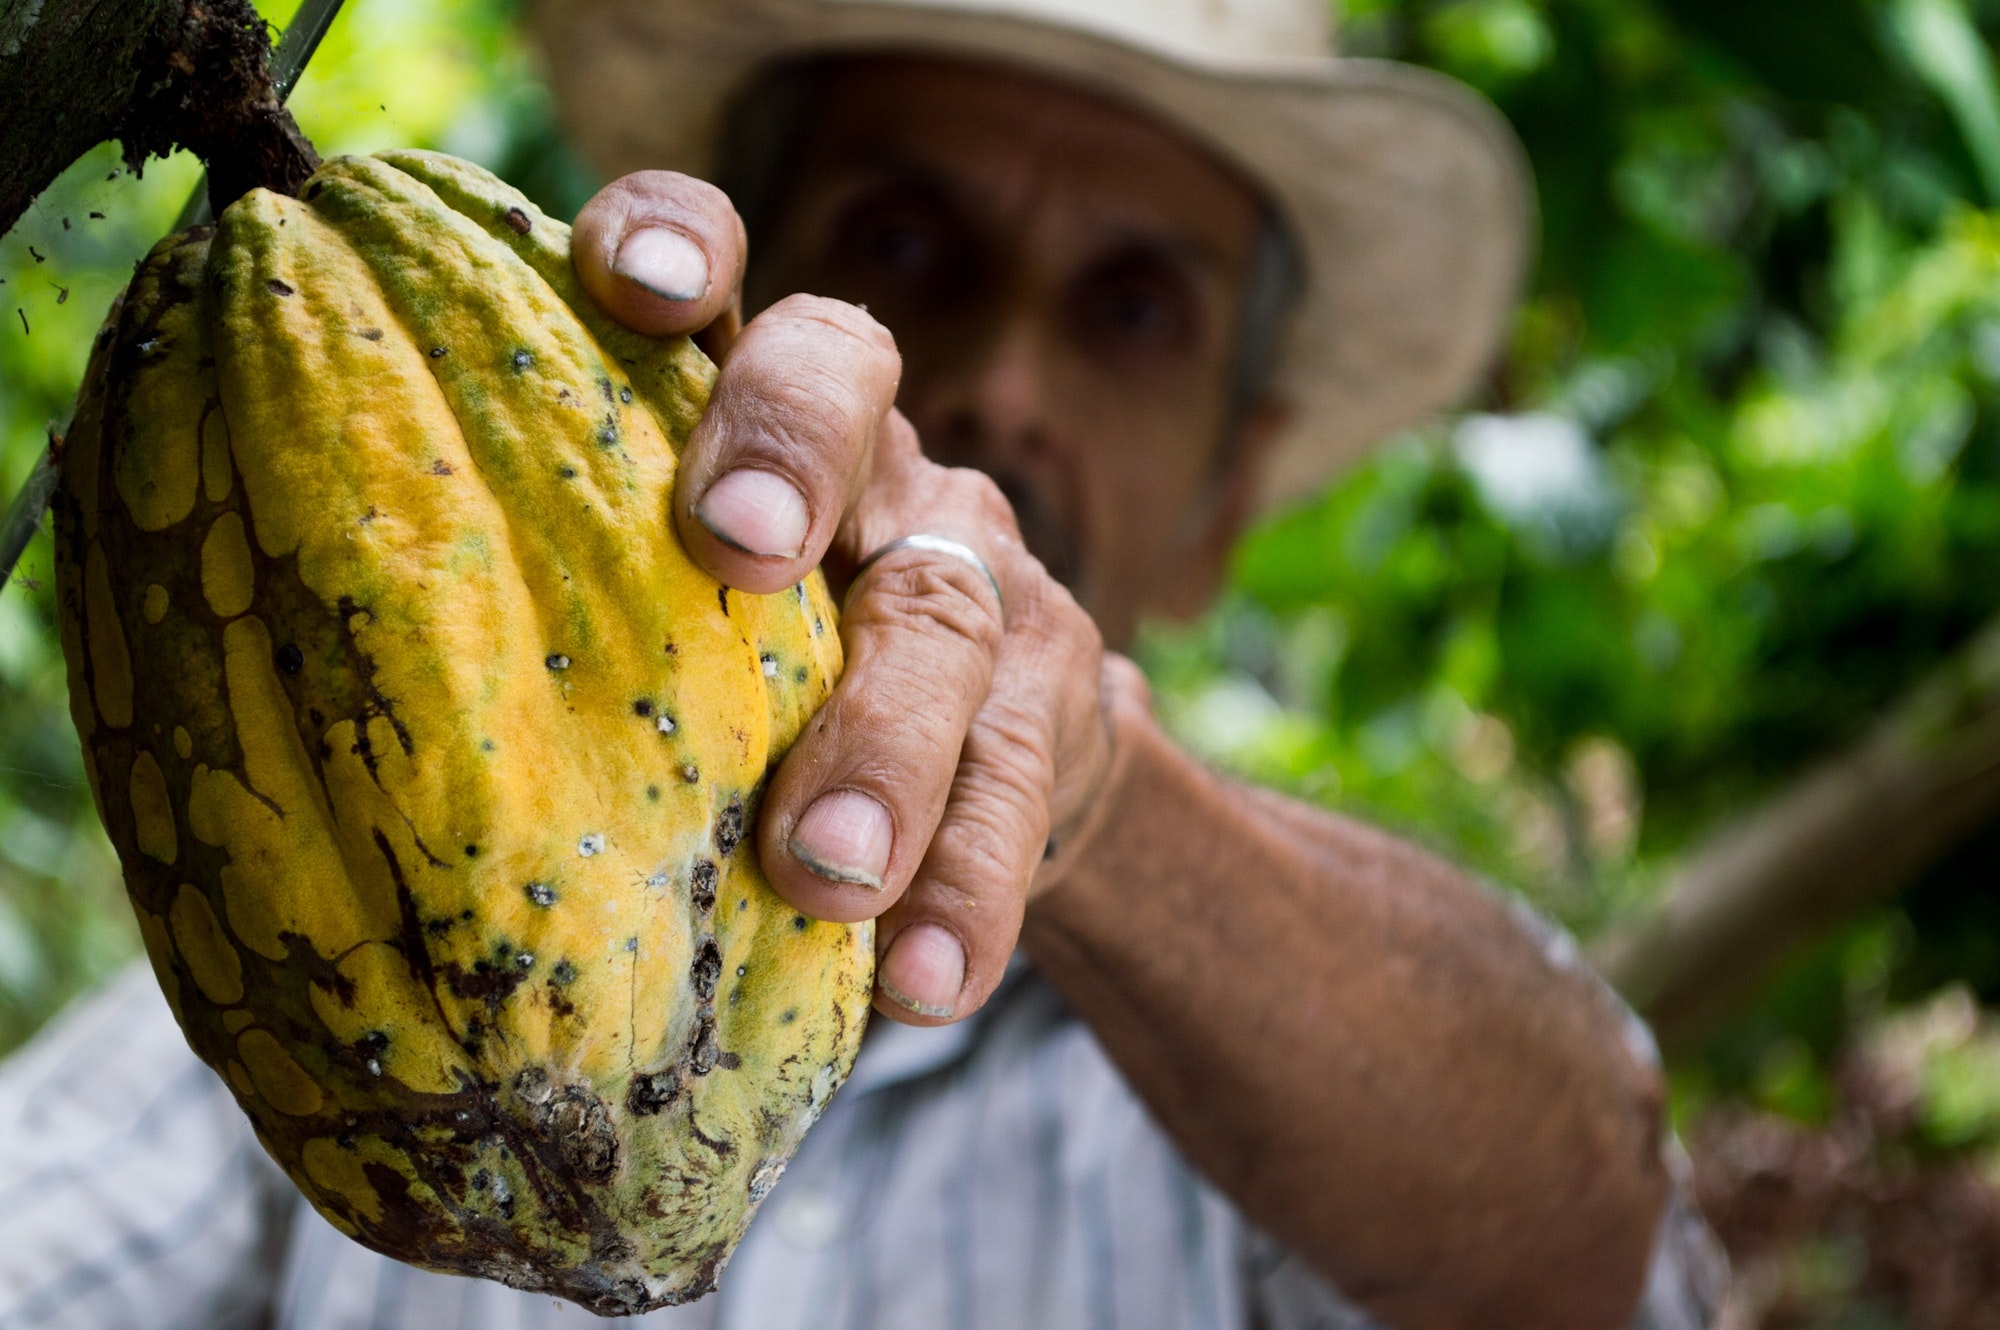 A smallholder farmer picks a ripe piece of cacao fruit from a tree.